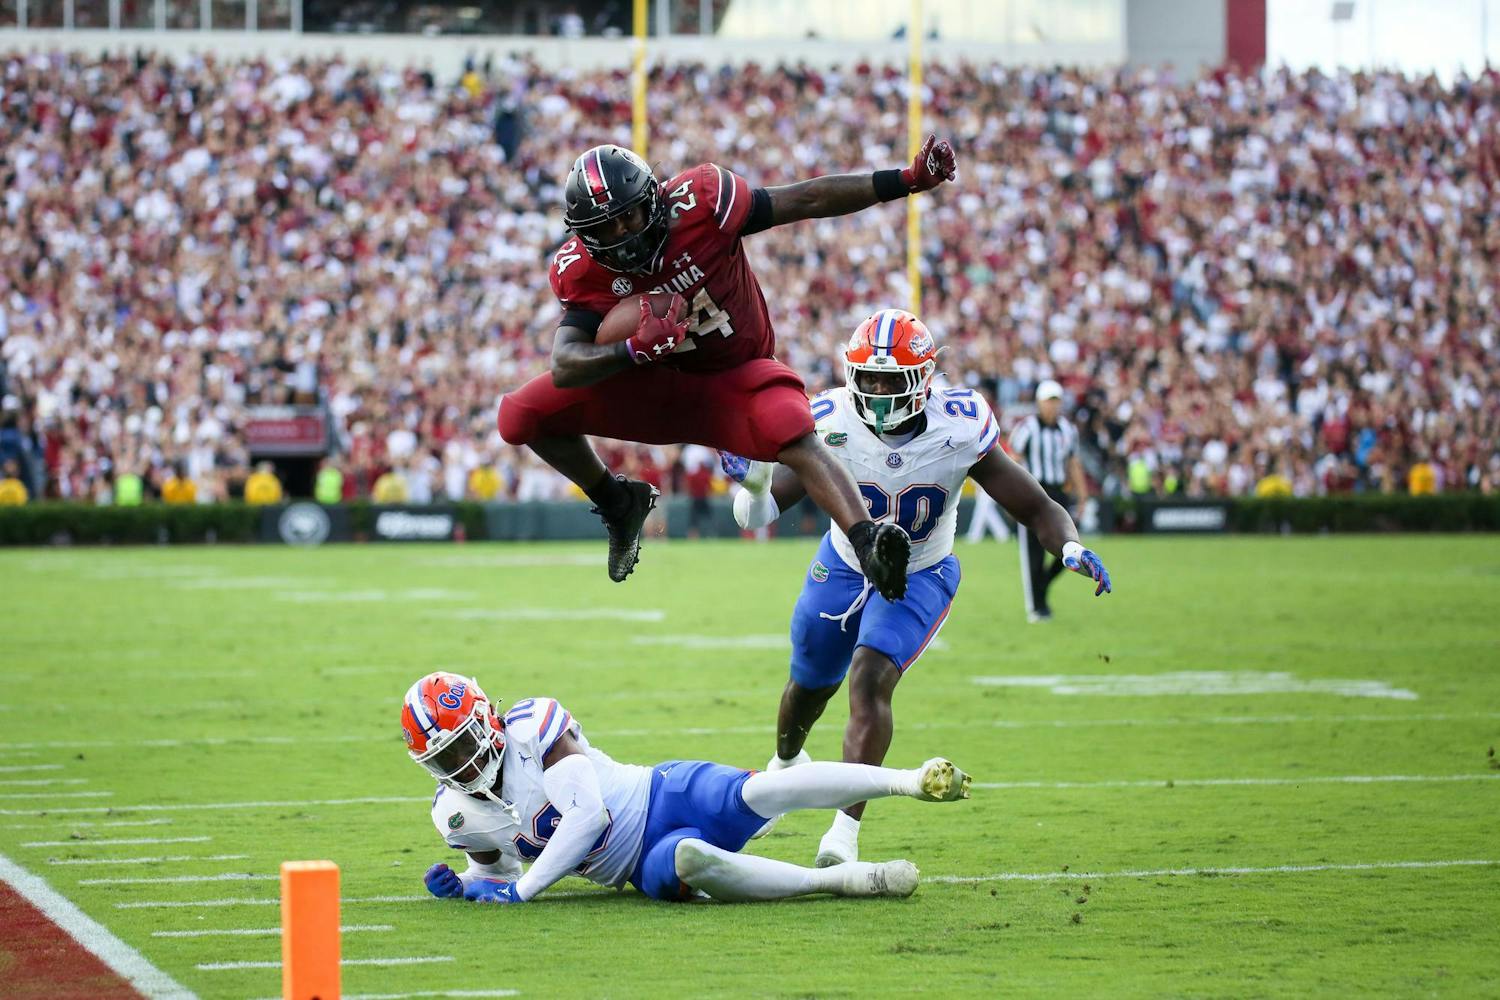 Redshirt senior running back Mario Anderson hurdles over defender during South Carolina’s game against Florida on Oct. 14, 2023, at Williams-Brice Stadium. Anderson rushed for 98 yards on 20 carries as the Gamecocks fell 41-39.